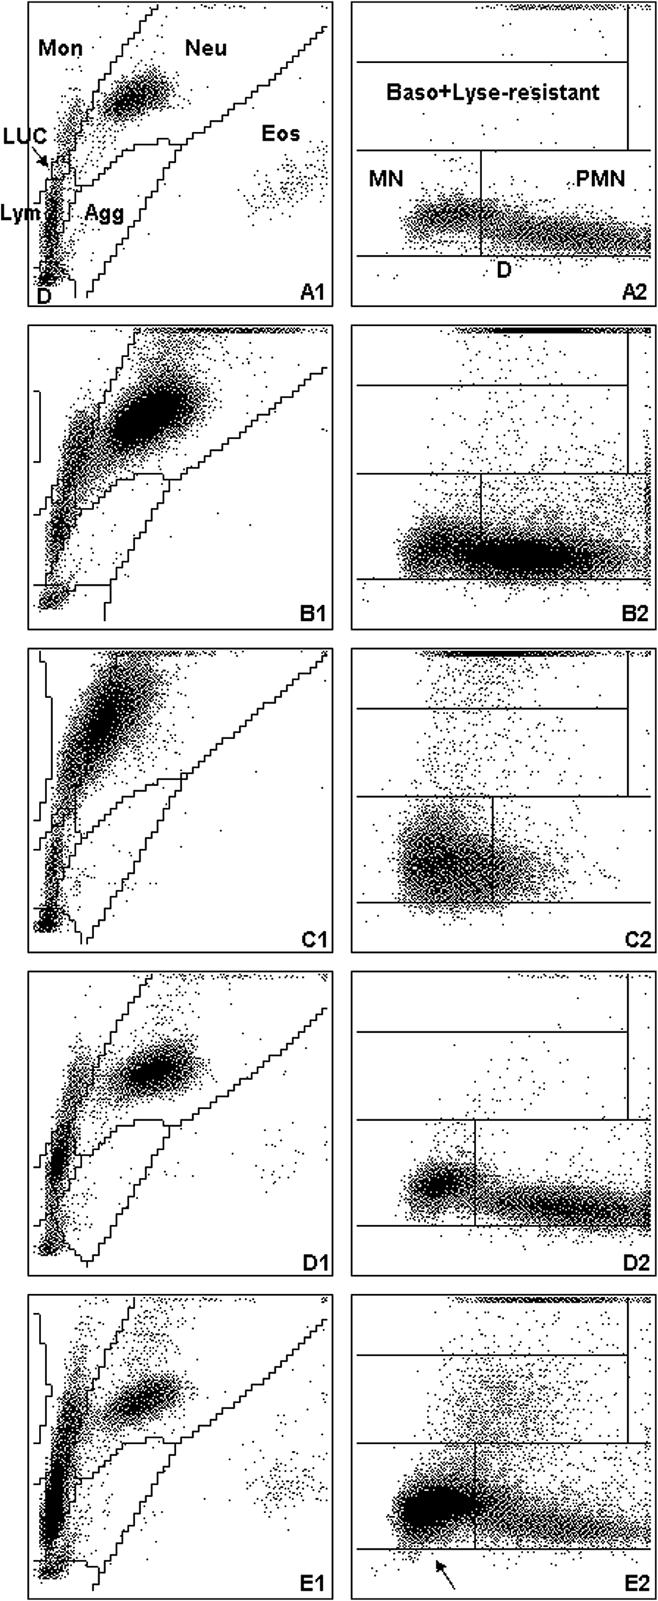 Stirn et al. BMC Veterinary Research 2014, 10:125 Page 5 of 8 Figure 3 Cytograms of the ADVIA 120 for horse samples. For remainder of key see Figure 1. (A) Cytograms without any abnormalities.